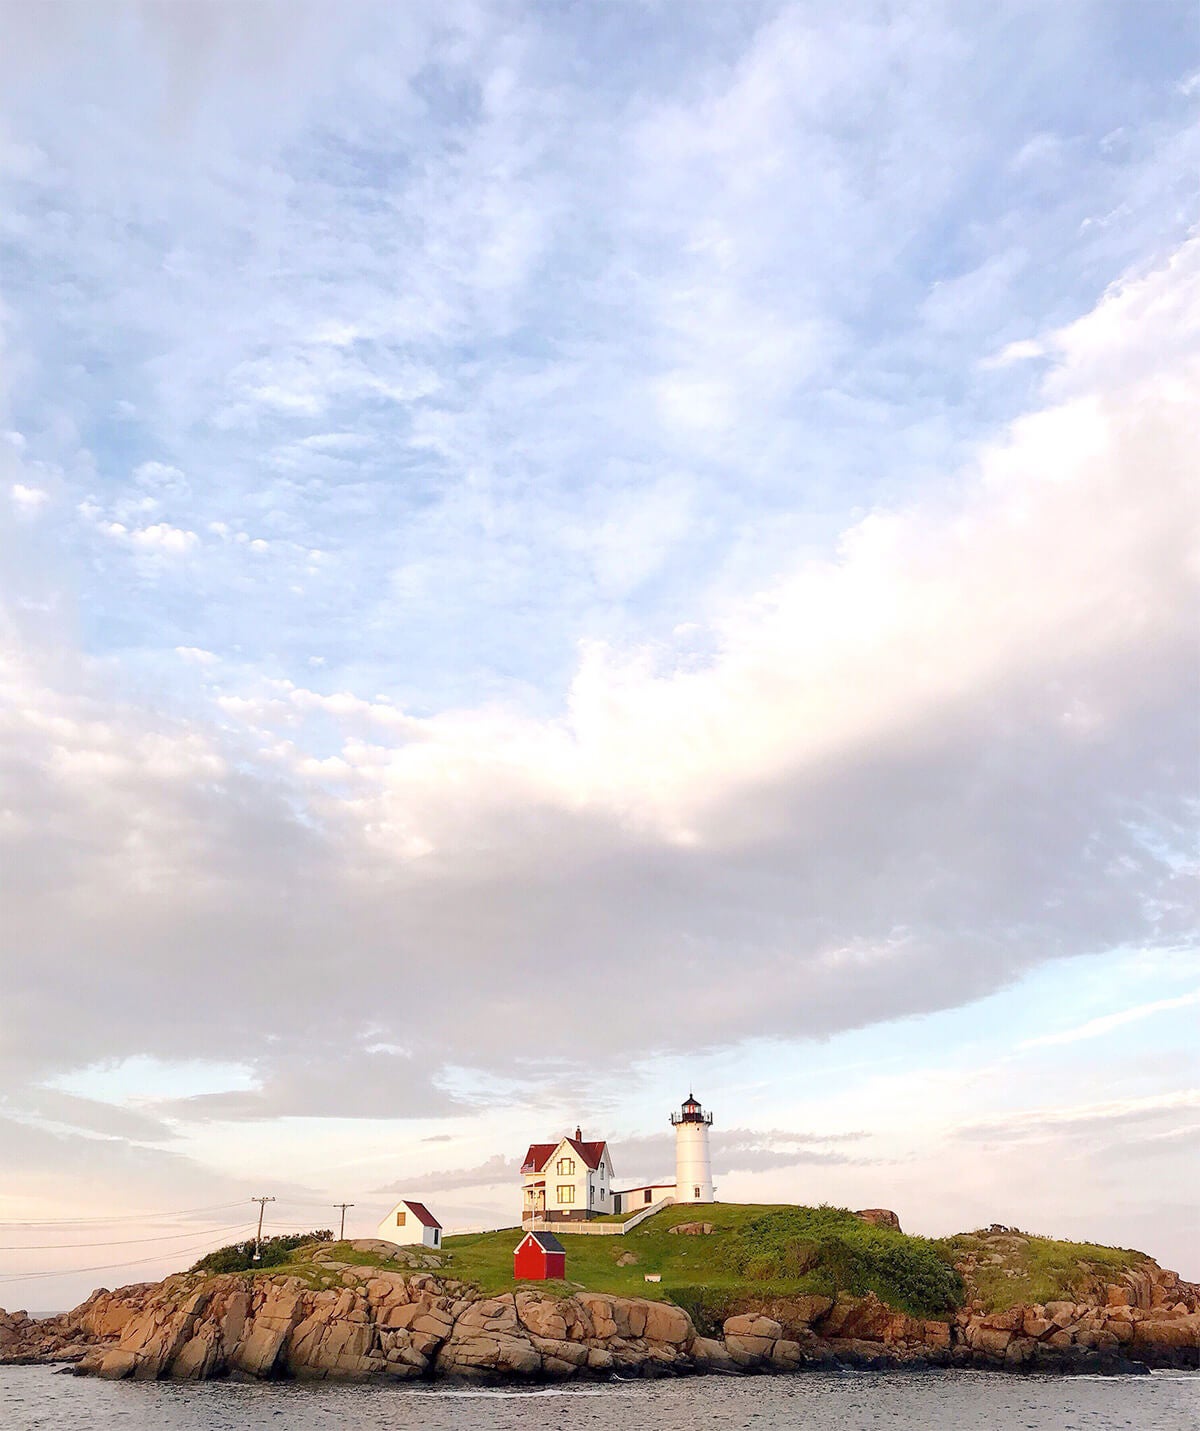 Photo of the Nubble lighthouse in York, Maine